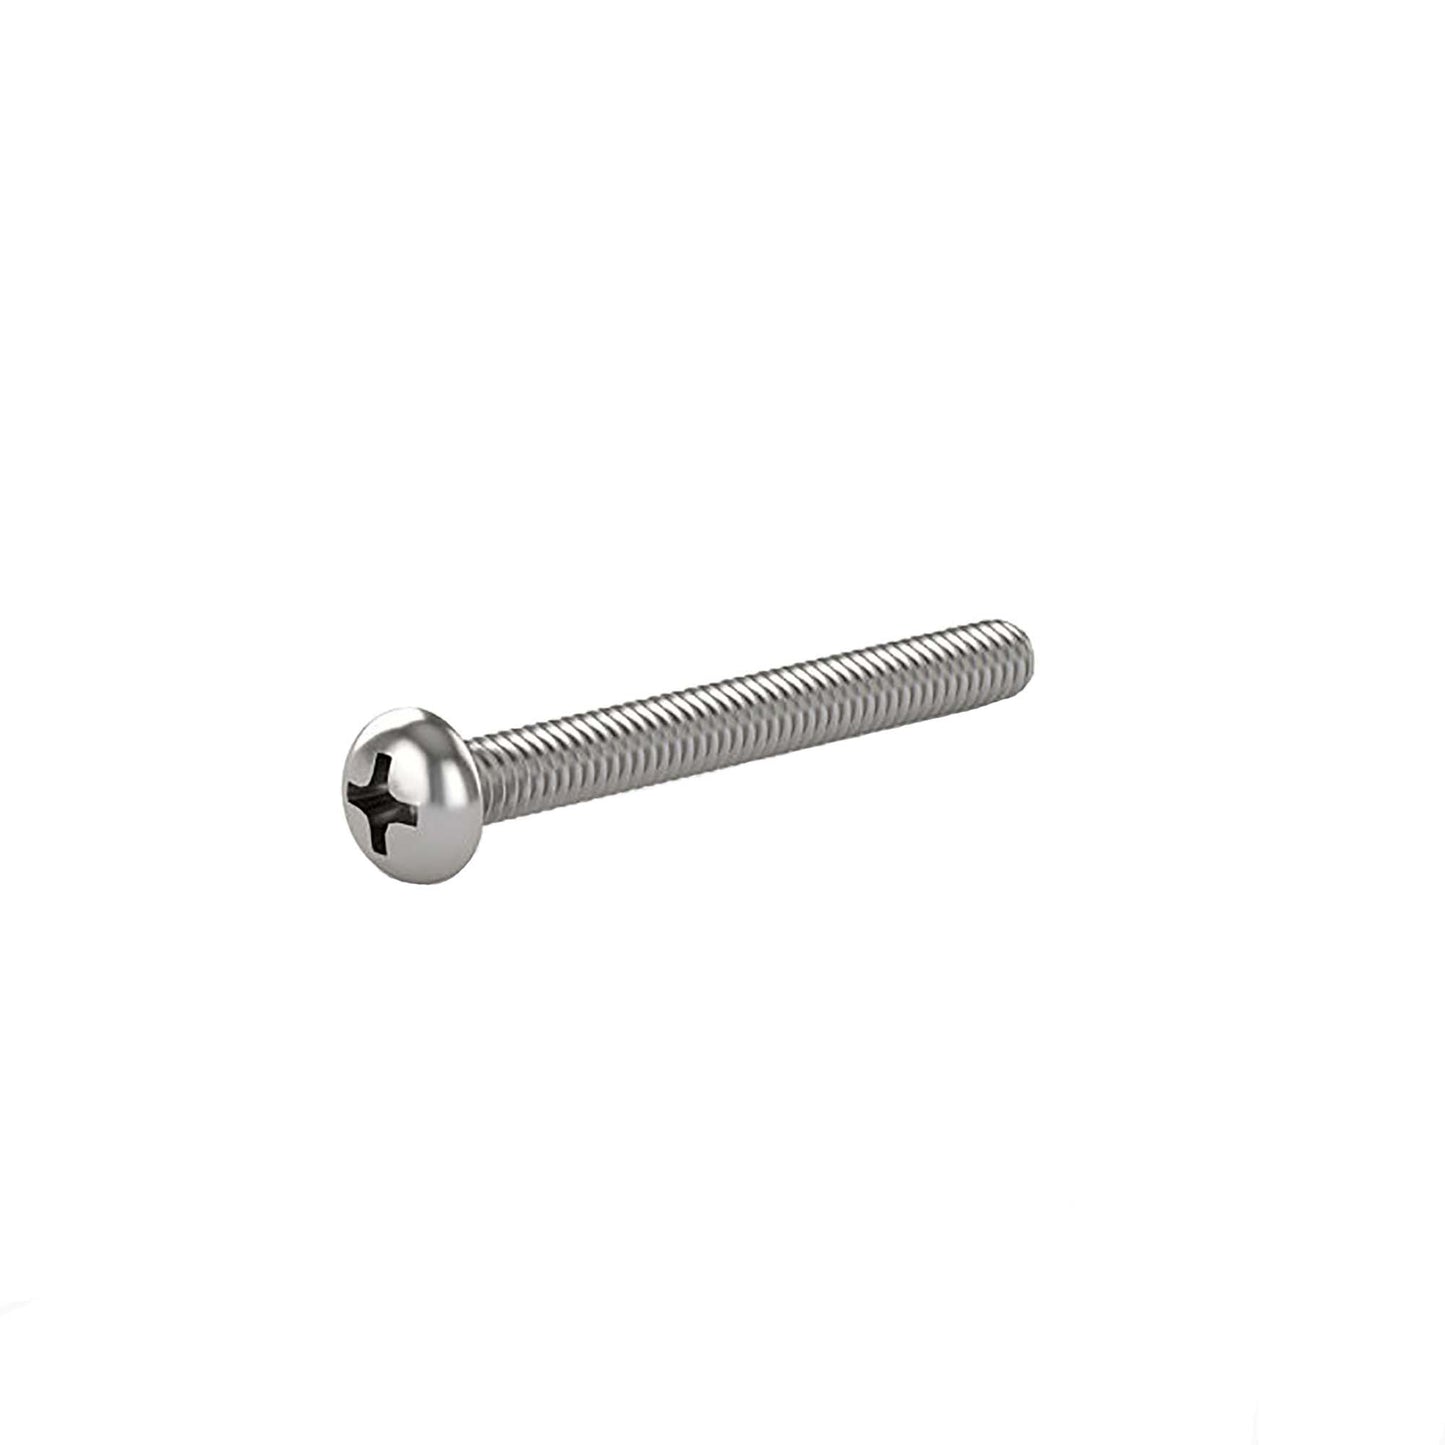 Pan Head Philips Self-tapp Screw for BR-252A Inflatable Blower